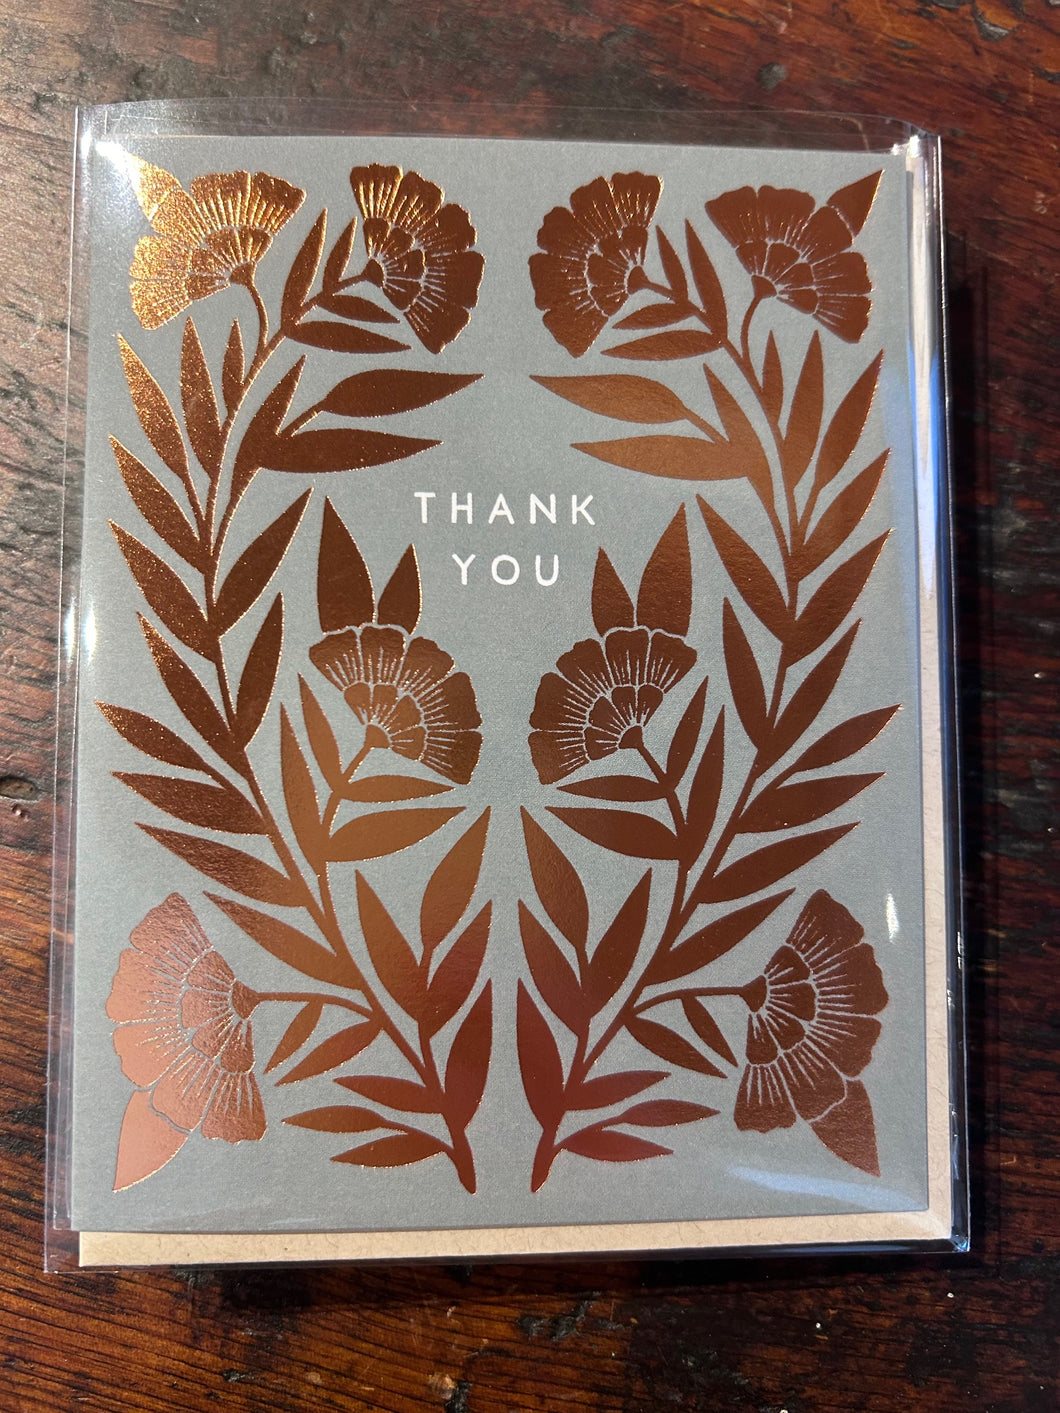 Thank You foil-stamped card